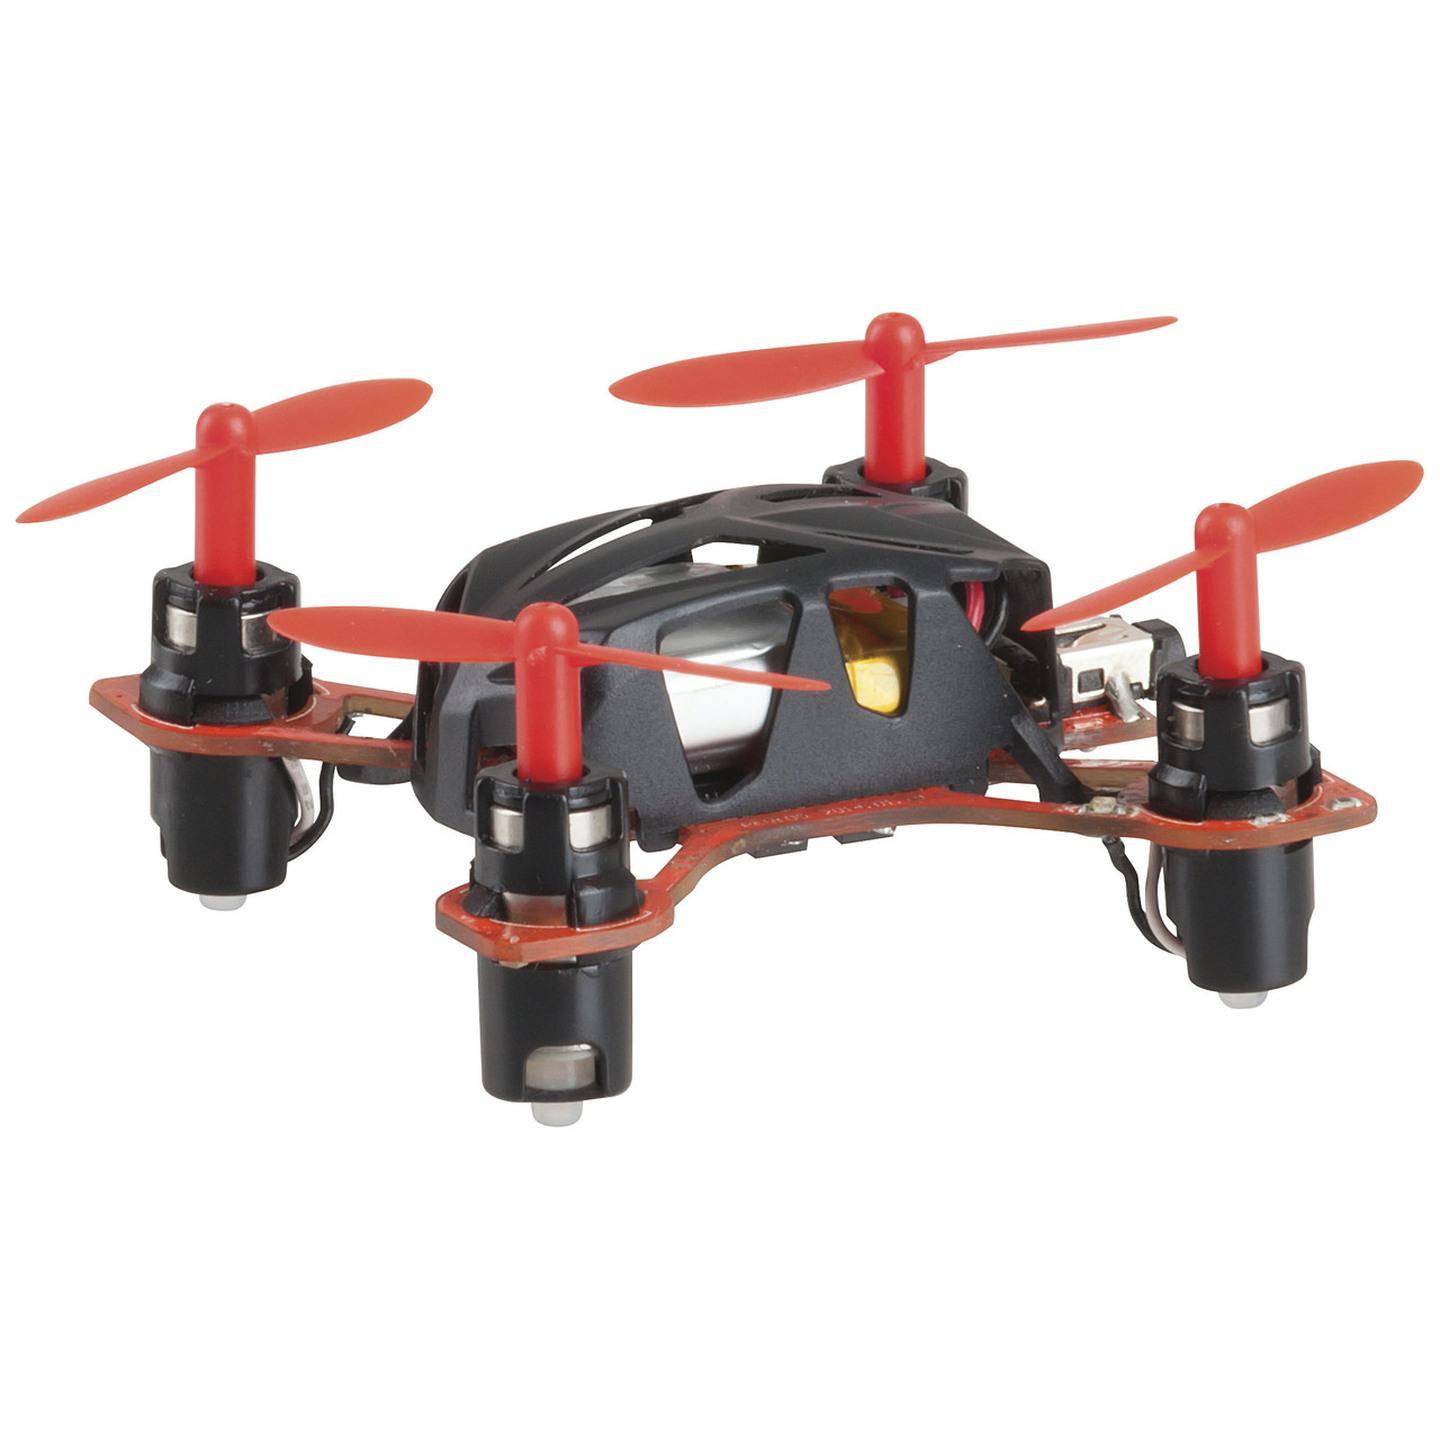 4 Channel Nano Size Quadcopter with Flip Control